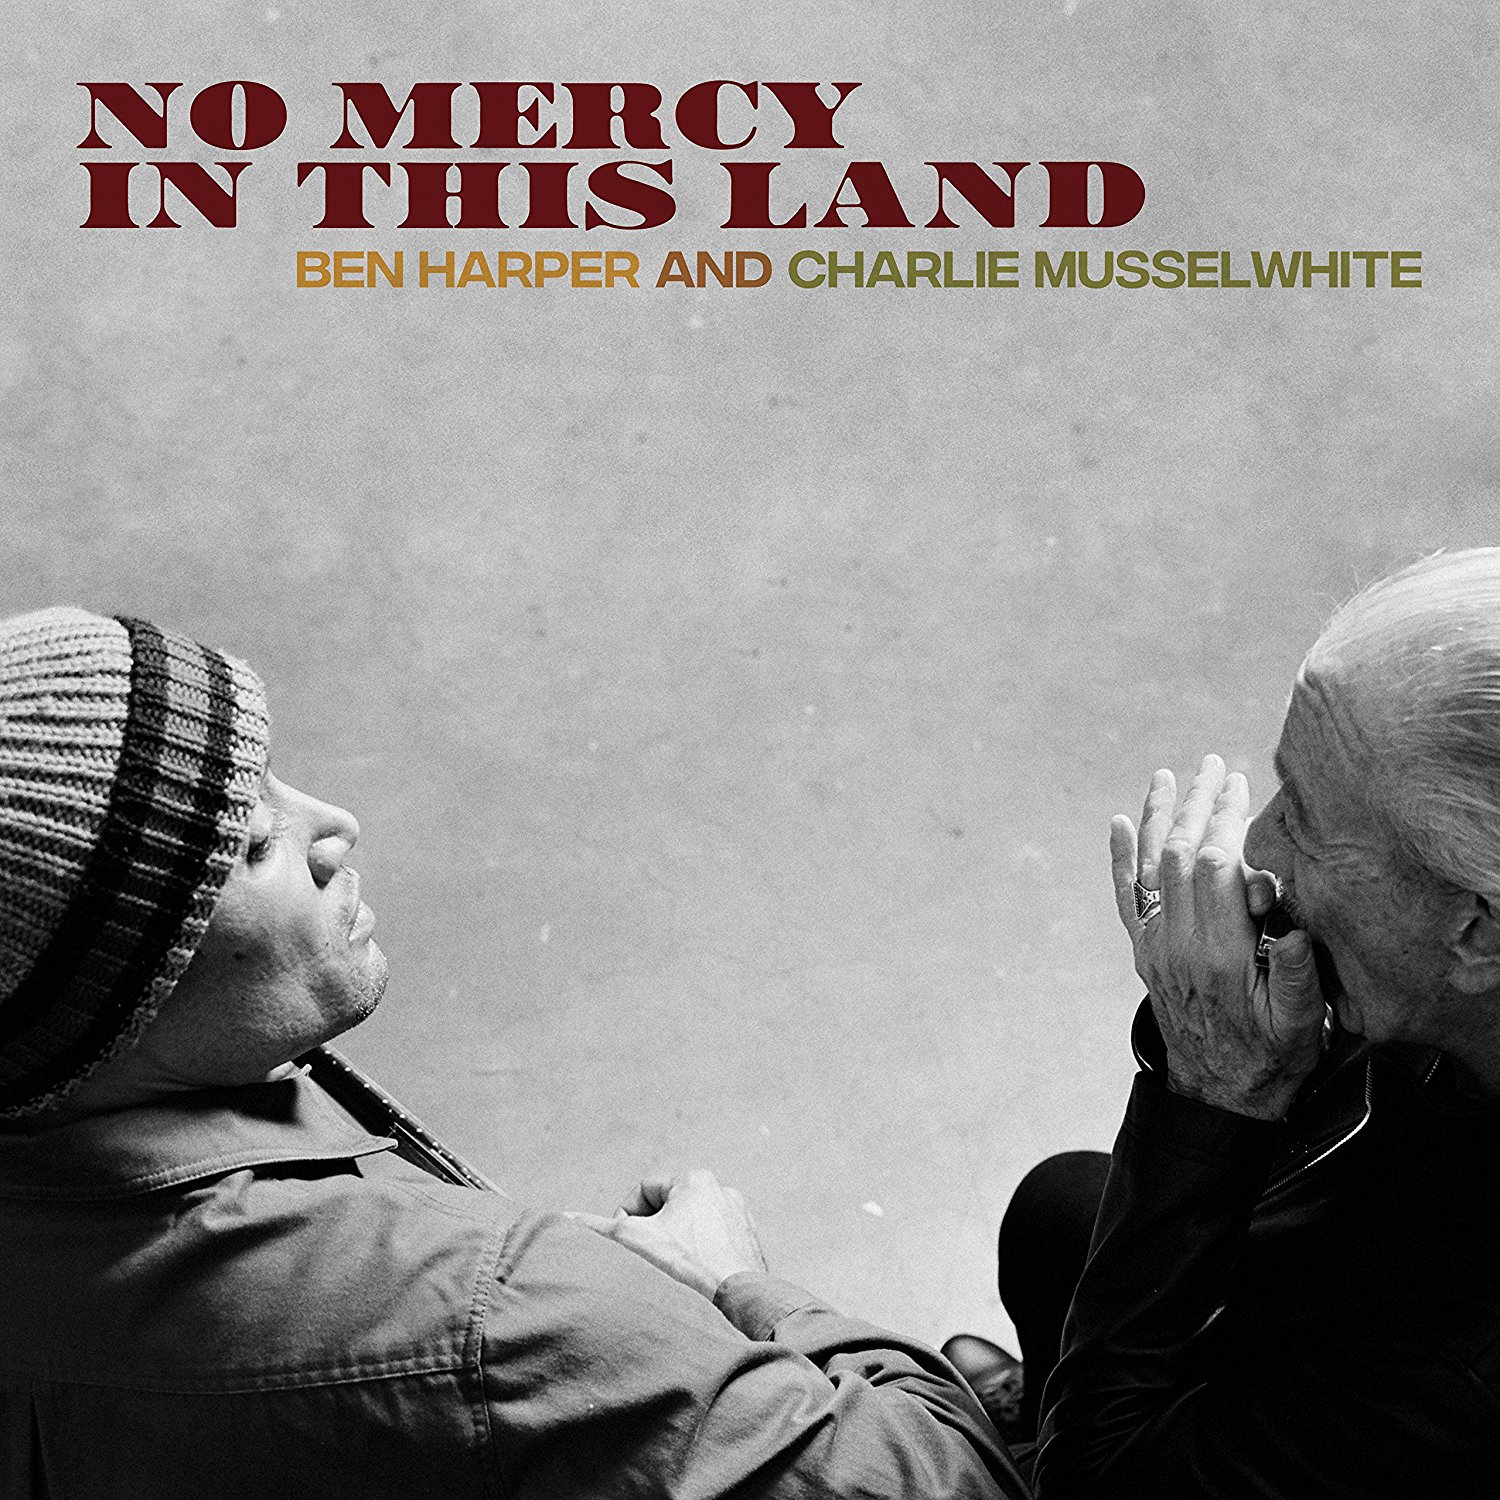 Ben Harper and Charlie Musselwhite: No Mercy In This Land